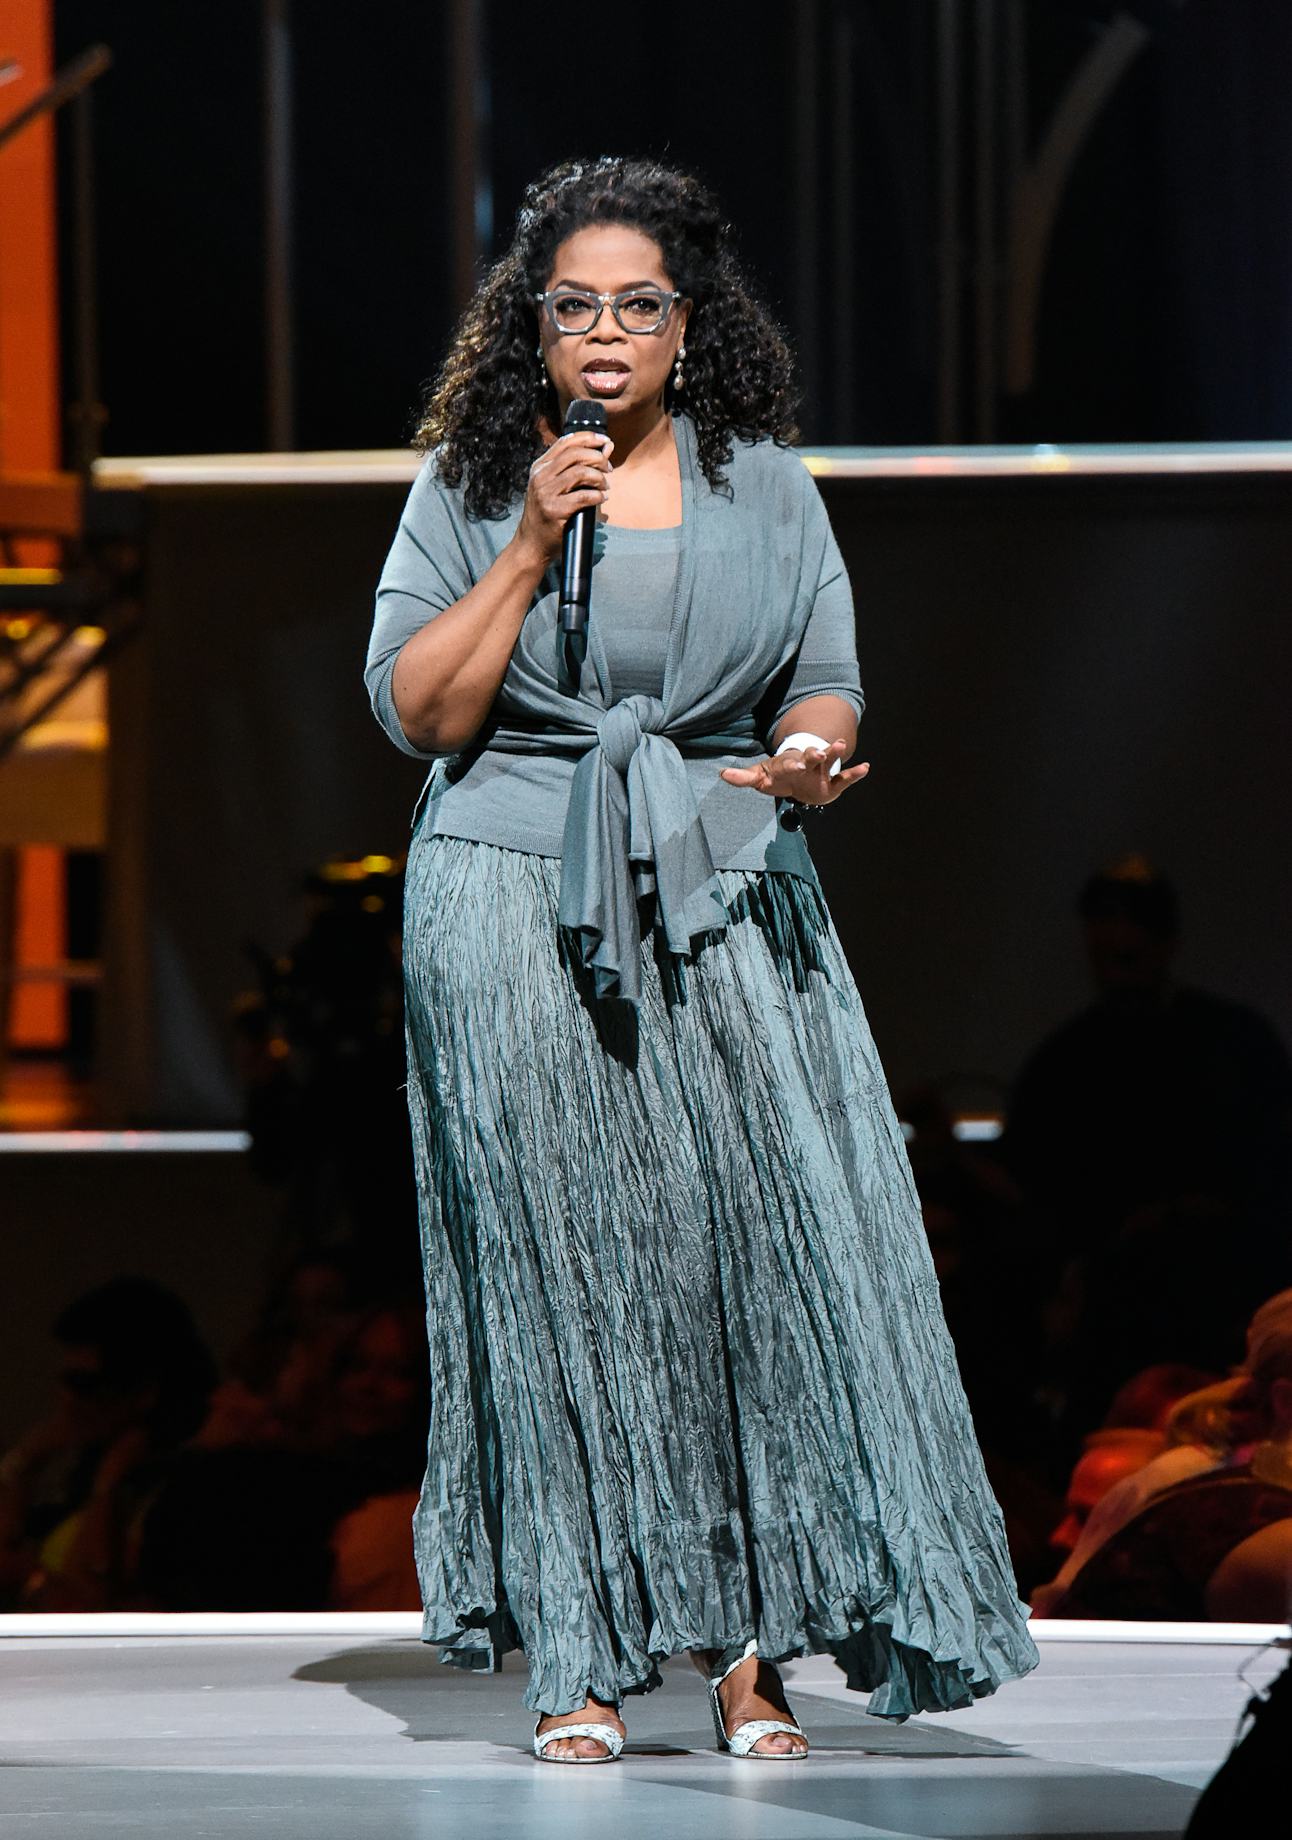 It's time to talk about Oprah's truly incredible glasses collection